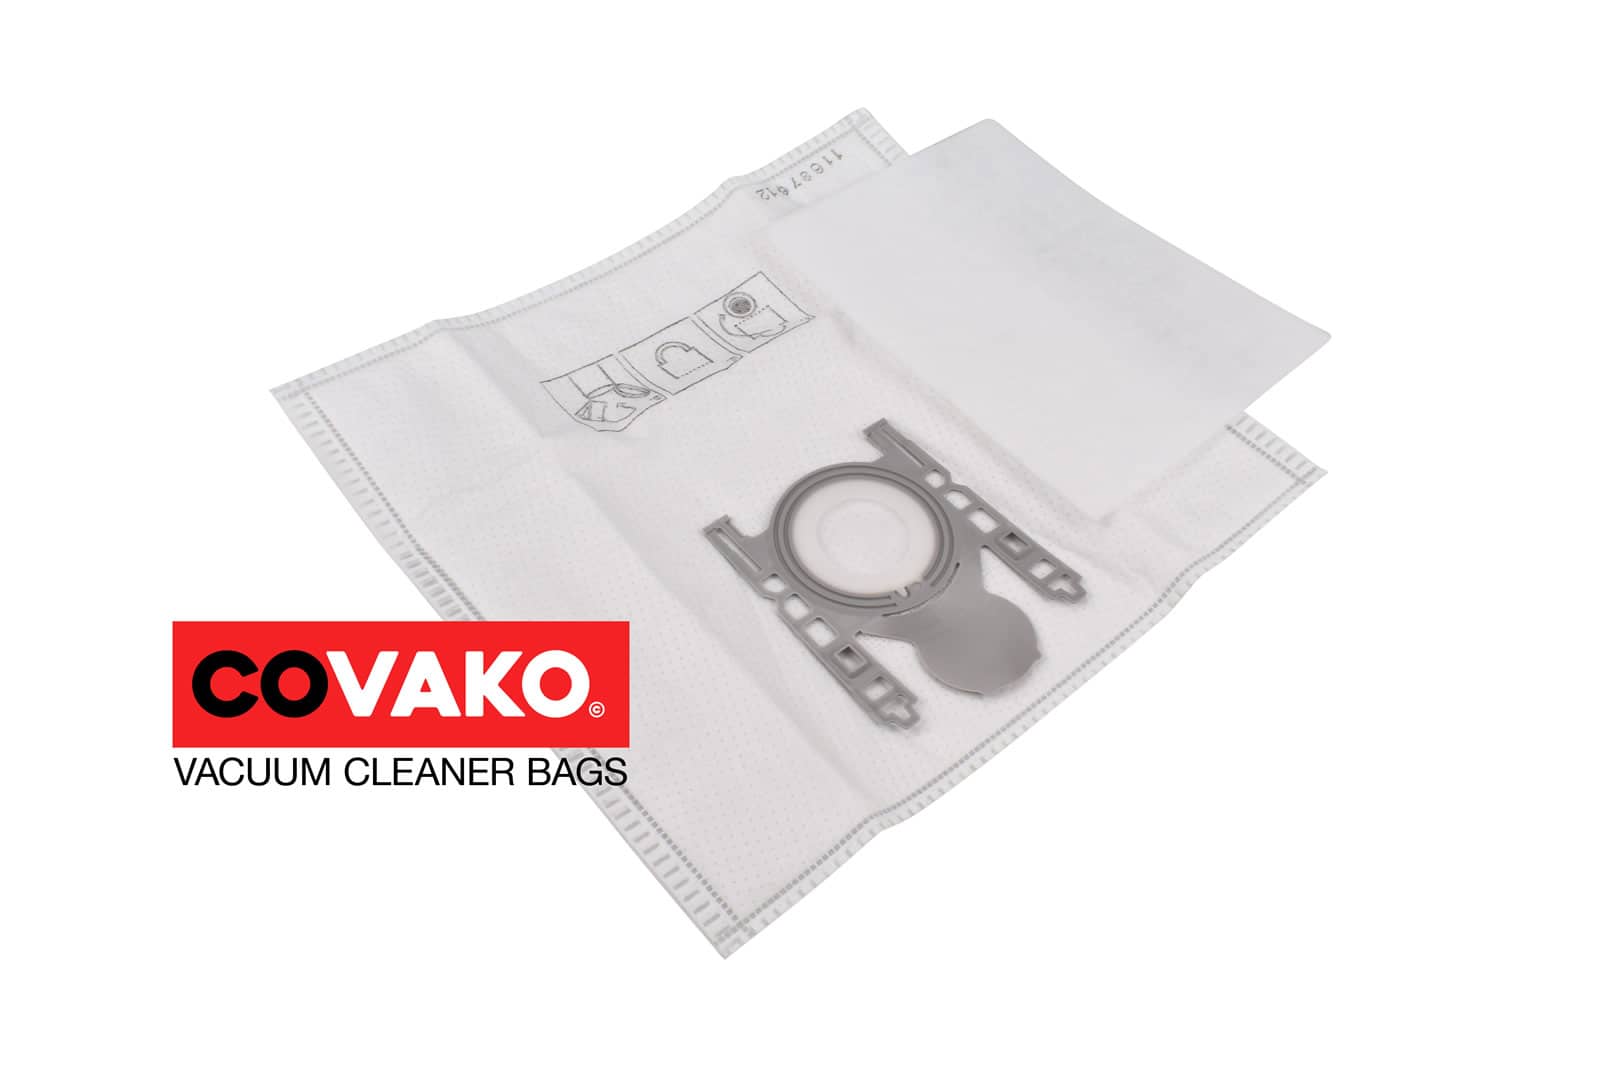 Bosch Formula 2000 / Synthesis - Bosch vacuum cleaner bags